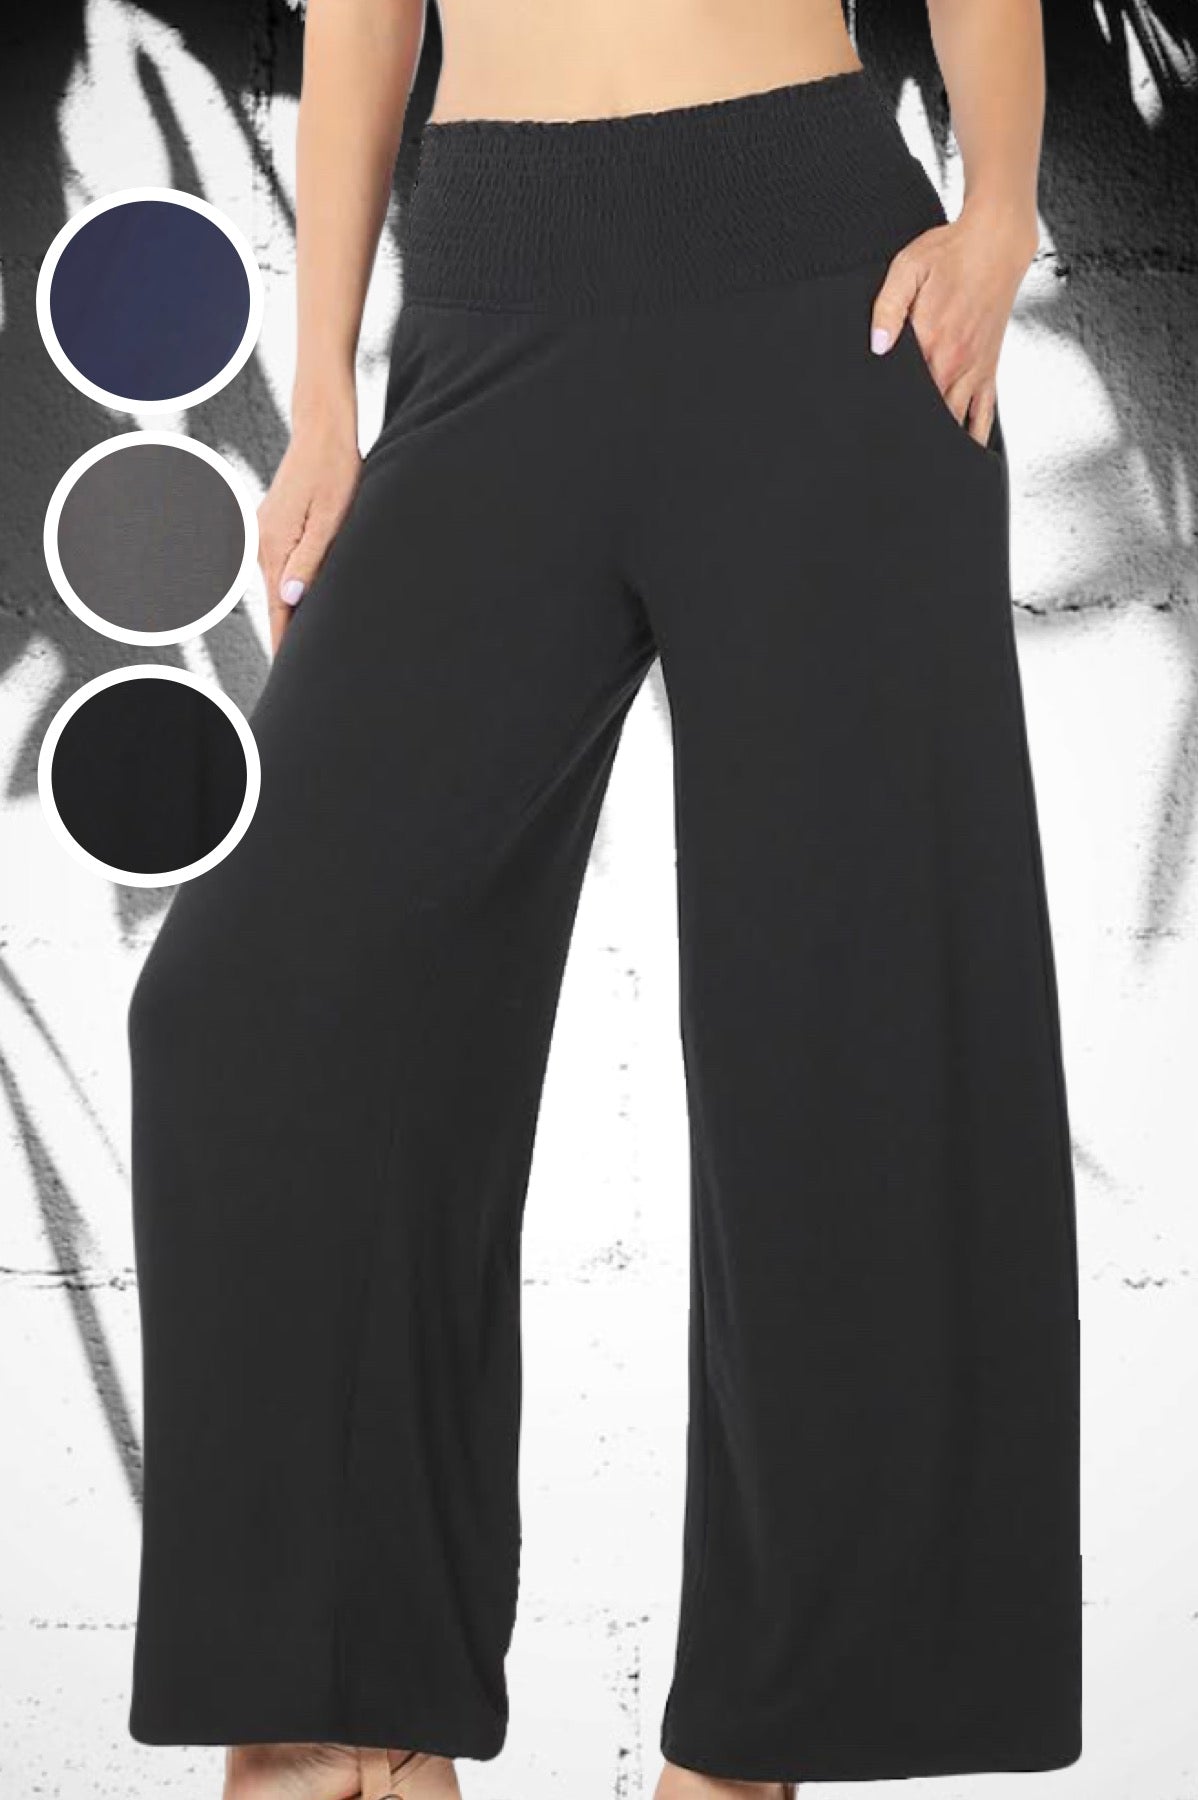 The Jeanette Pants with Pockets feature a comfortable stretch-smocked yoga-style waistband and a relaxed fit through the hip and thigh. These pants transition from loungewear to evening wear effortlessly...fancy them up with heels and your favorite accessories for a comfortable yet polished evening look. 57% polyester | 38% rayon | 5% spandex available in Black, Ash Grey, Navy Blue